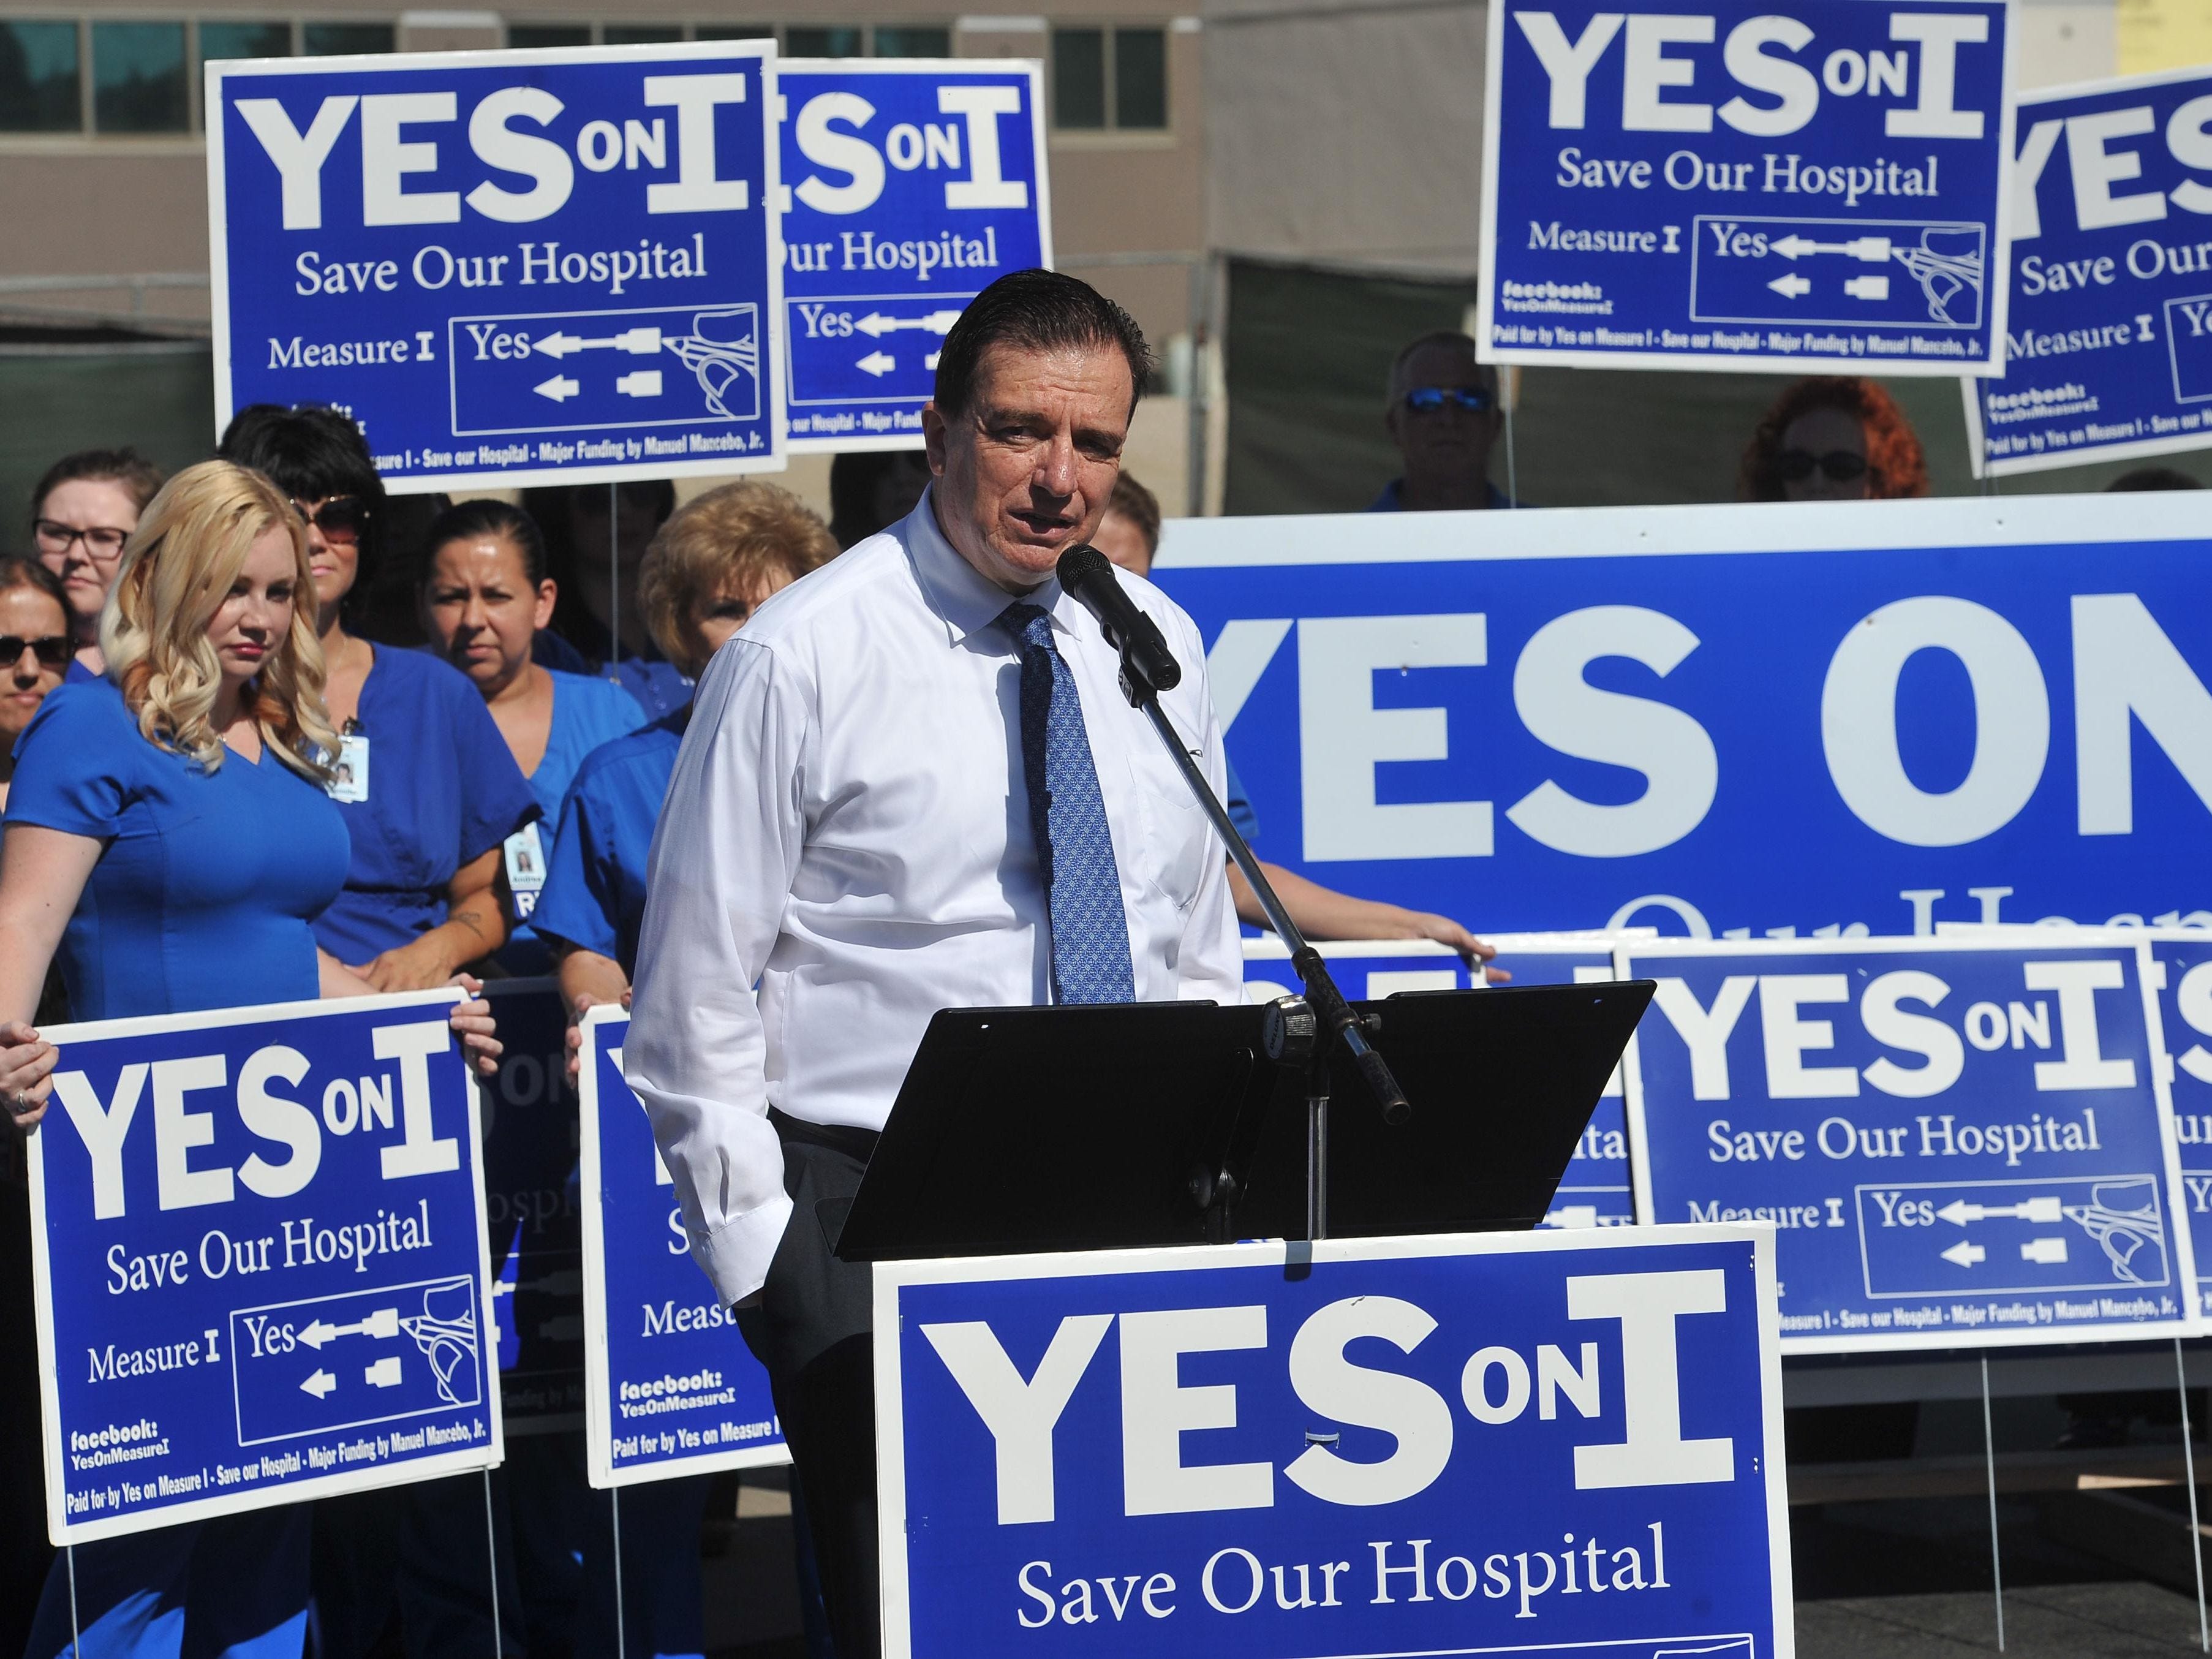 Dr. Benny Benzeevi speaks during the Yes on Measure I Save Our Hospital press conference in front of the Tulare Regional Medical Center tower on July 12, 2016.